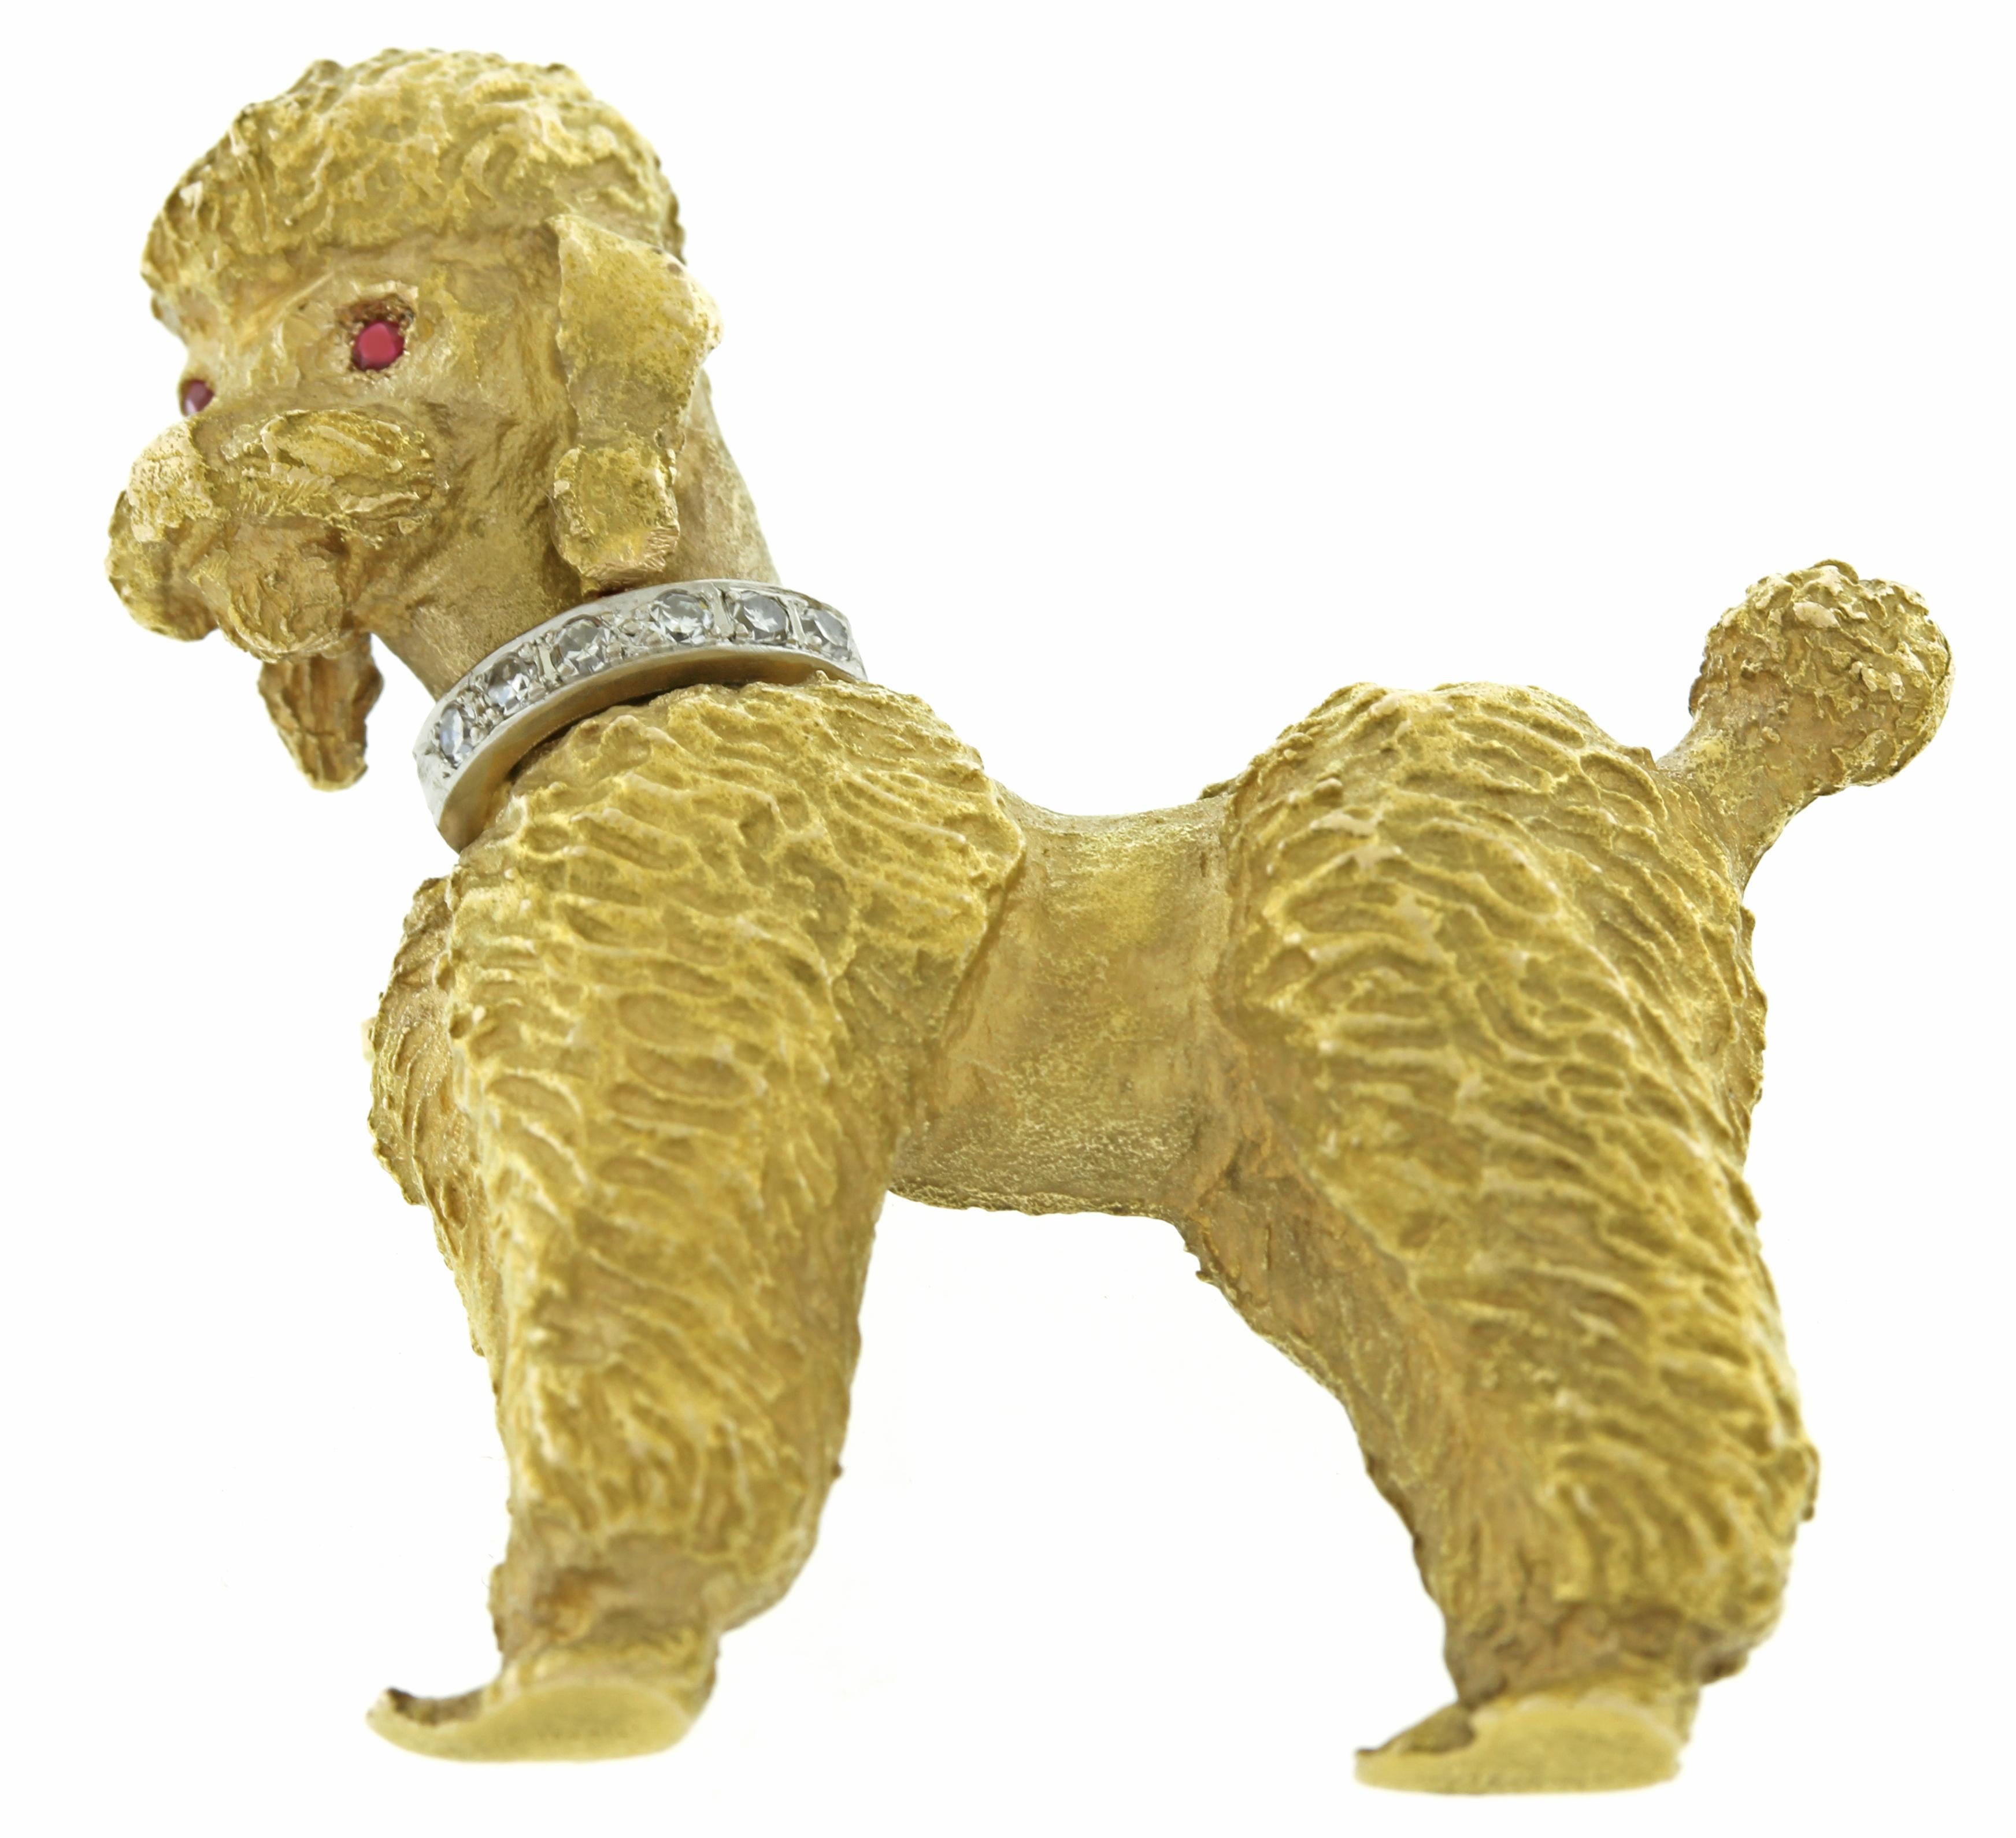 From Tiffany, this poodle brooch has a diamond and white gold collar with ruby eyes.
• Designer: Tiffany
• Metal: 14kt yellow and white gold
• Stamped and numbered: Tiffany, 10569, 14kt
• Gemstones: 6Diamonds= .03cts
                       